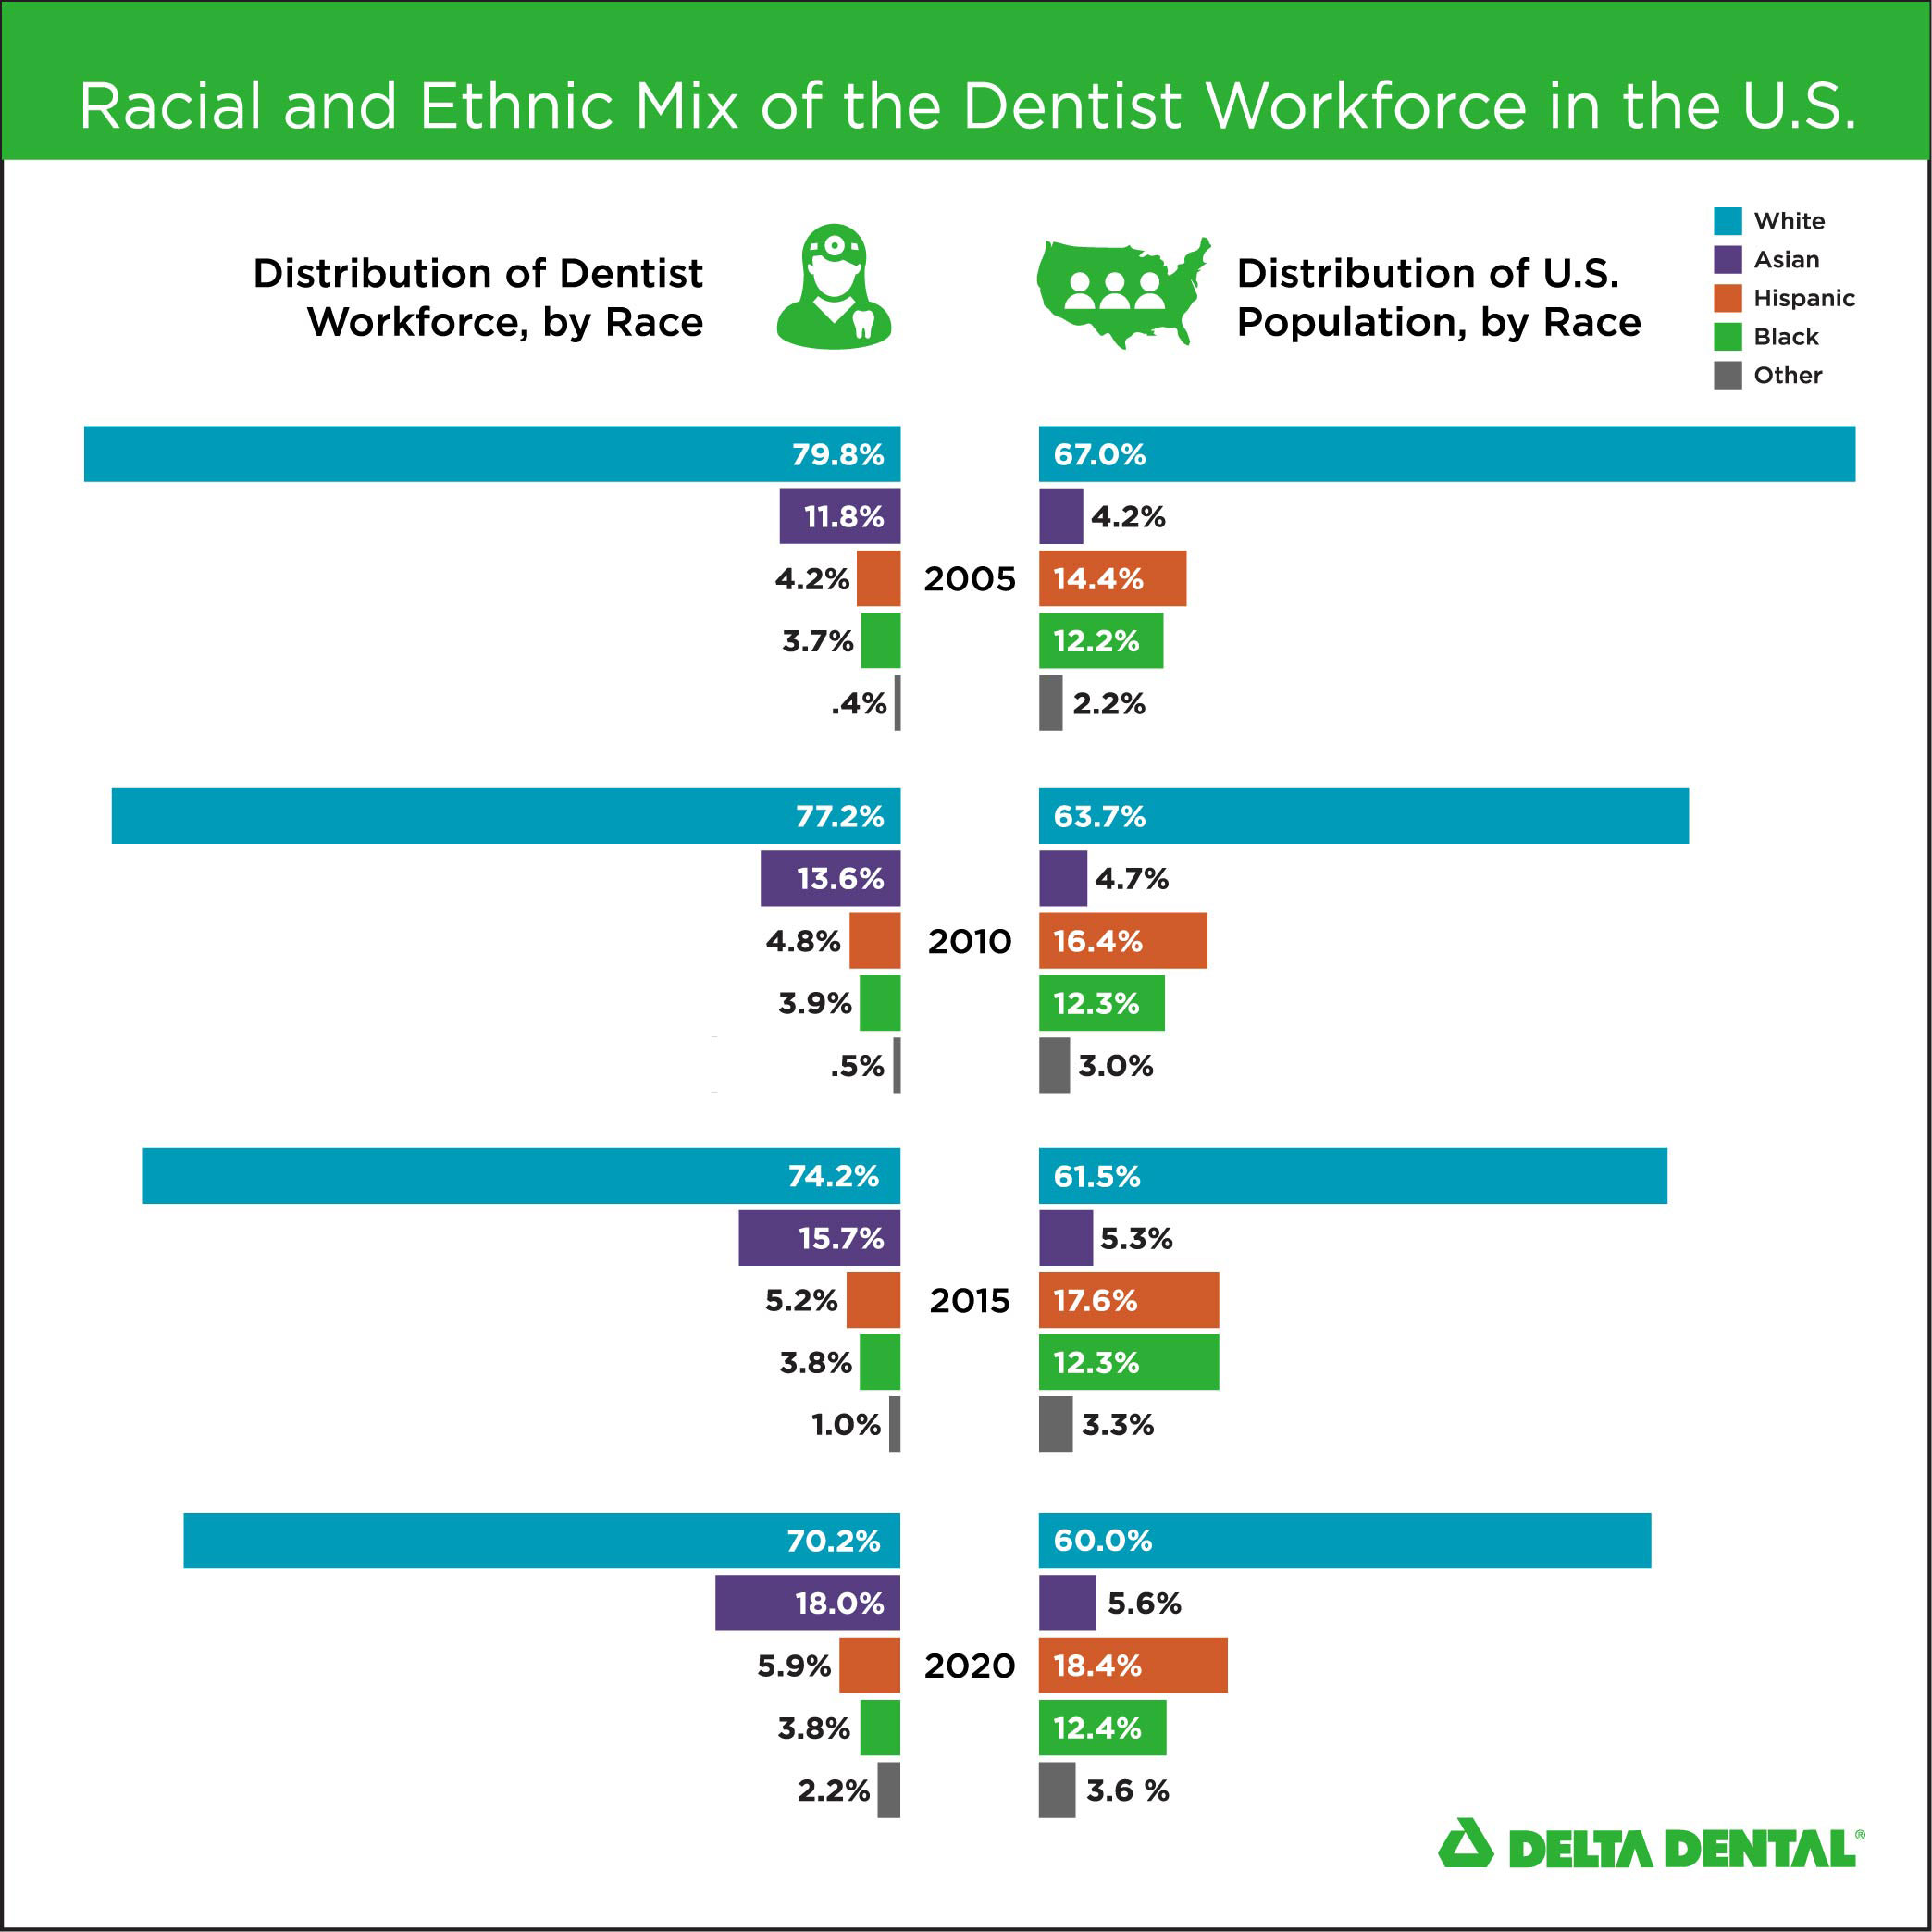 racial and ethnic mix of the Dentist Workforce in the U.S.